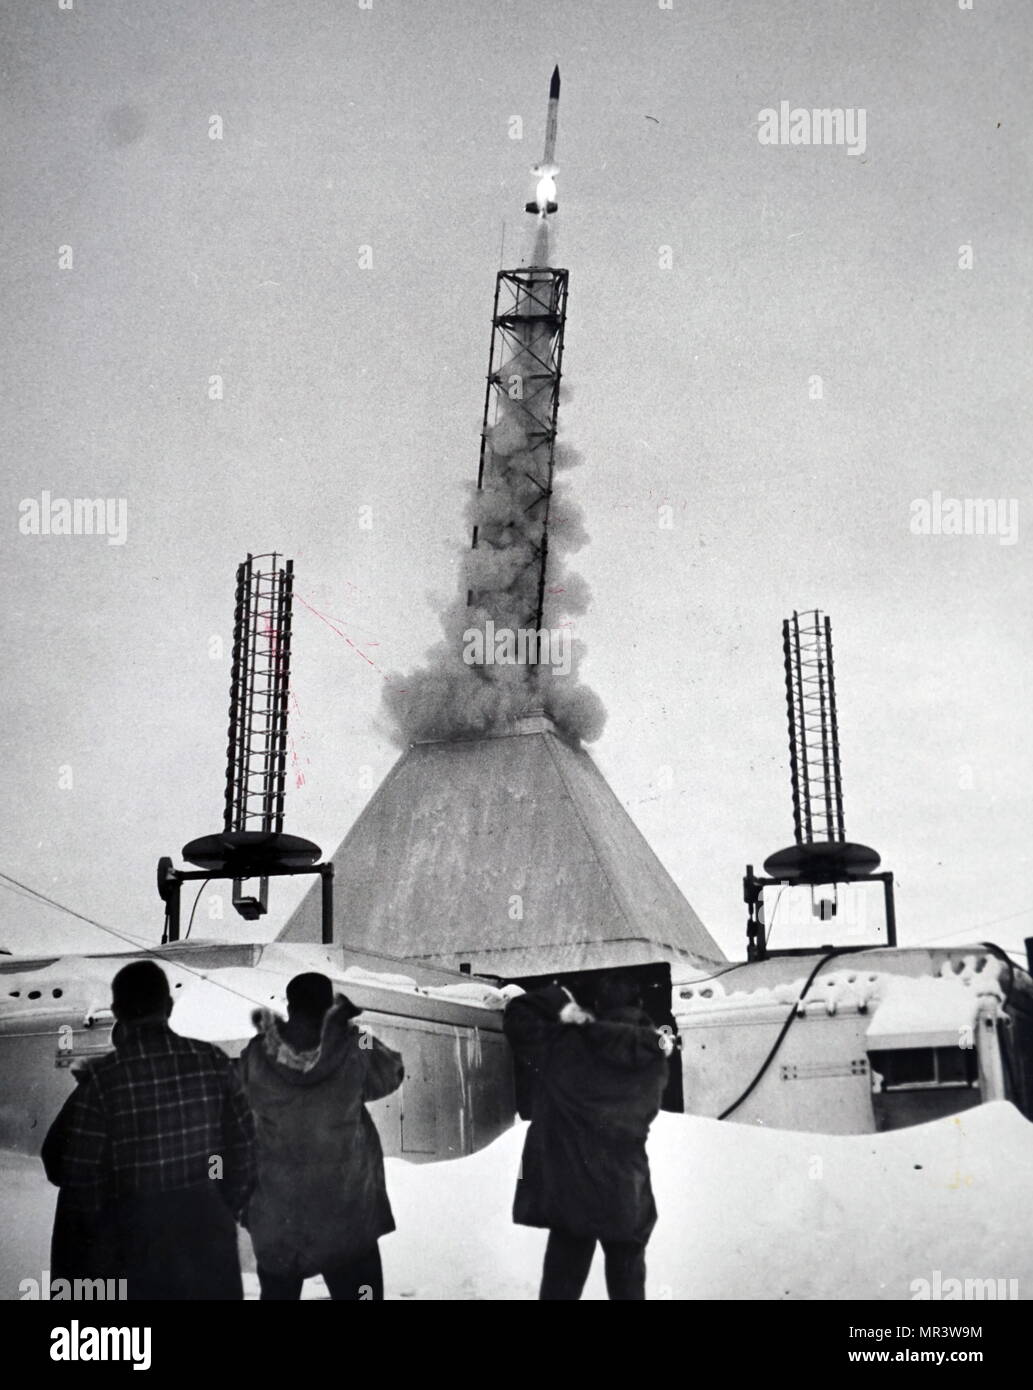 Photograph taken during the launch of the Aerobee rocket, a small ...